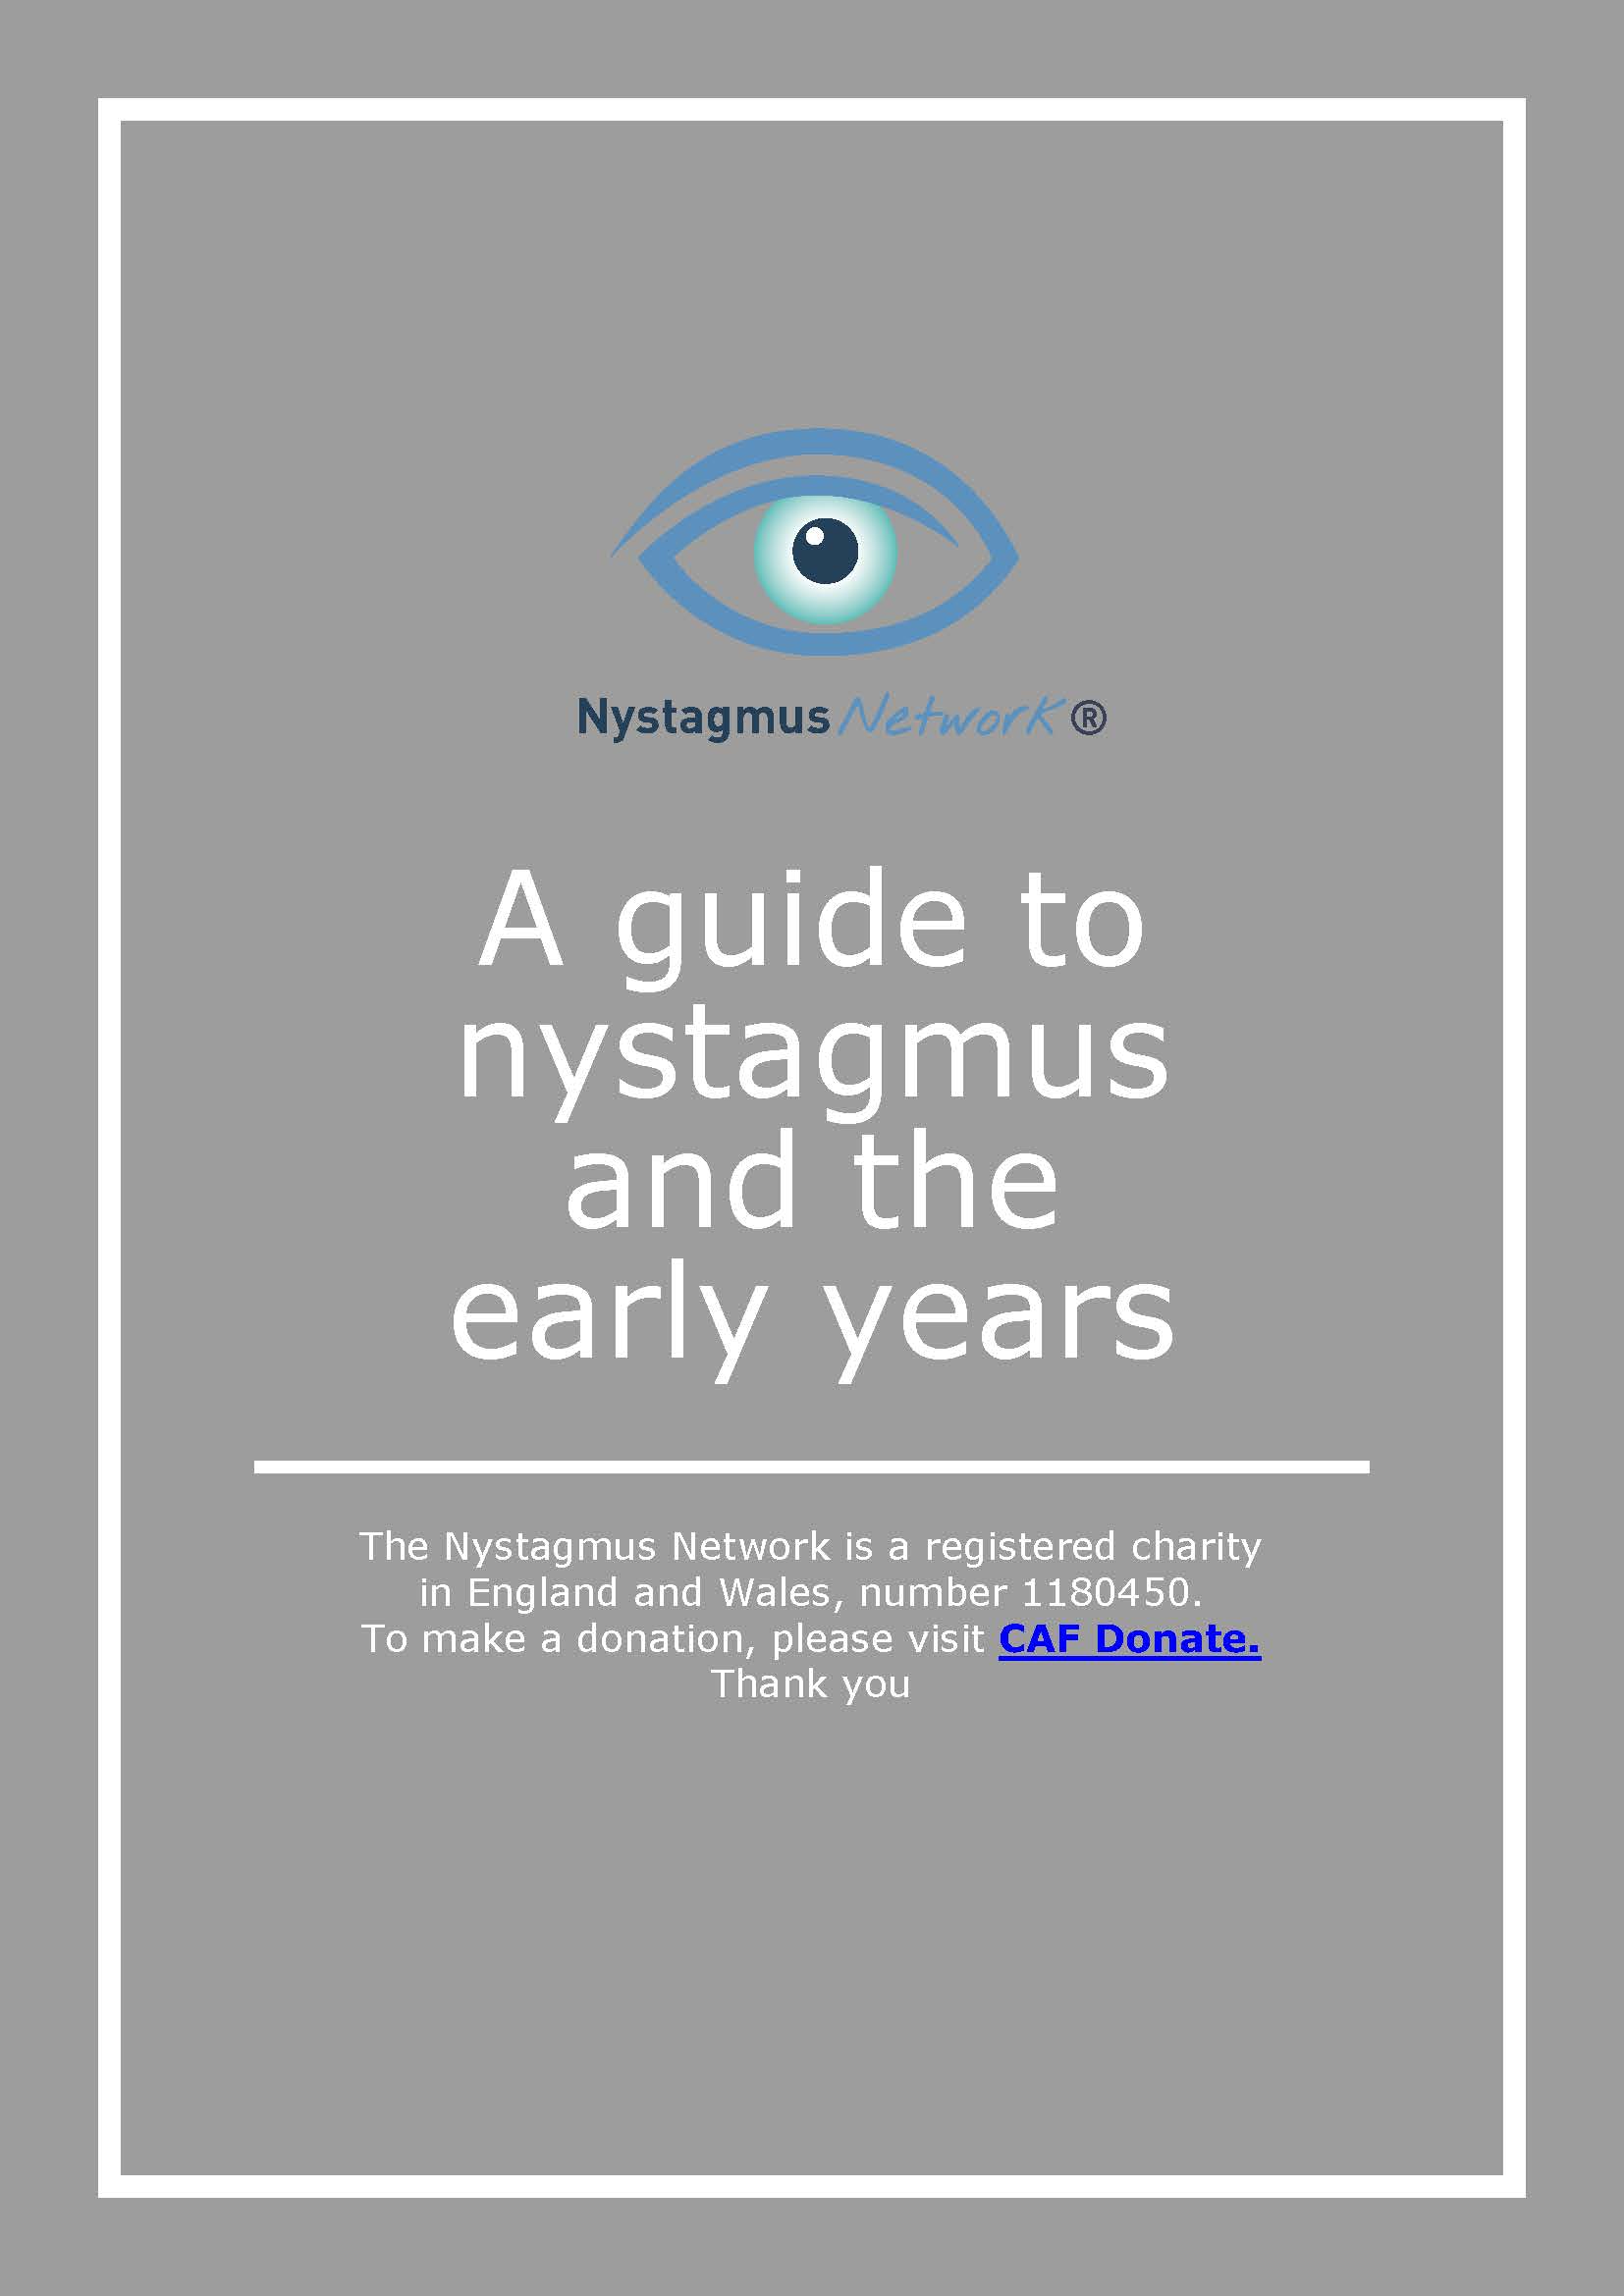 The front cover of the Nystagmus Network guide to nystagmus and the early years.